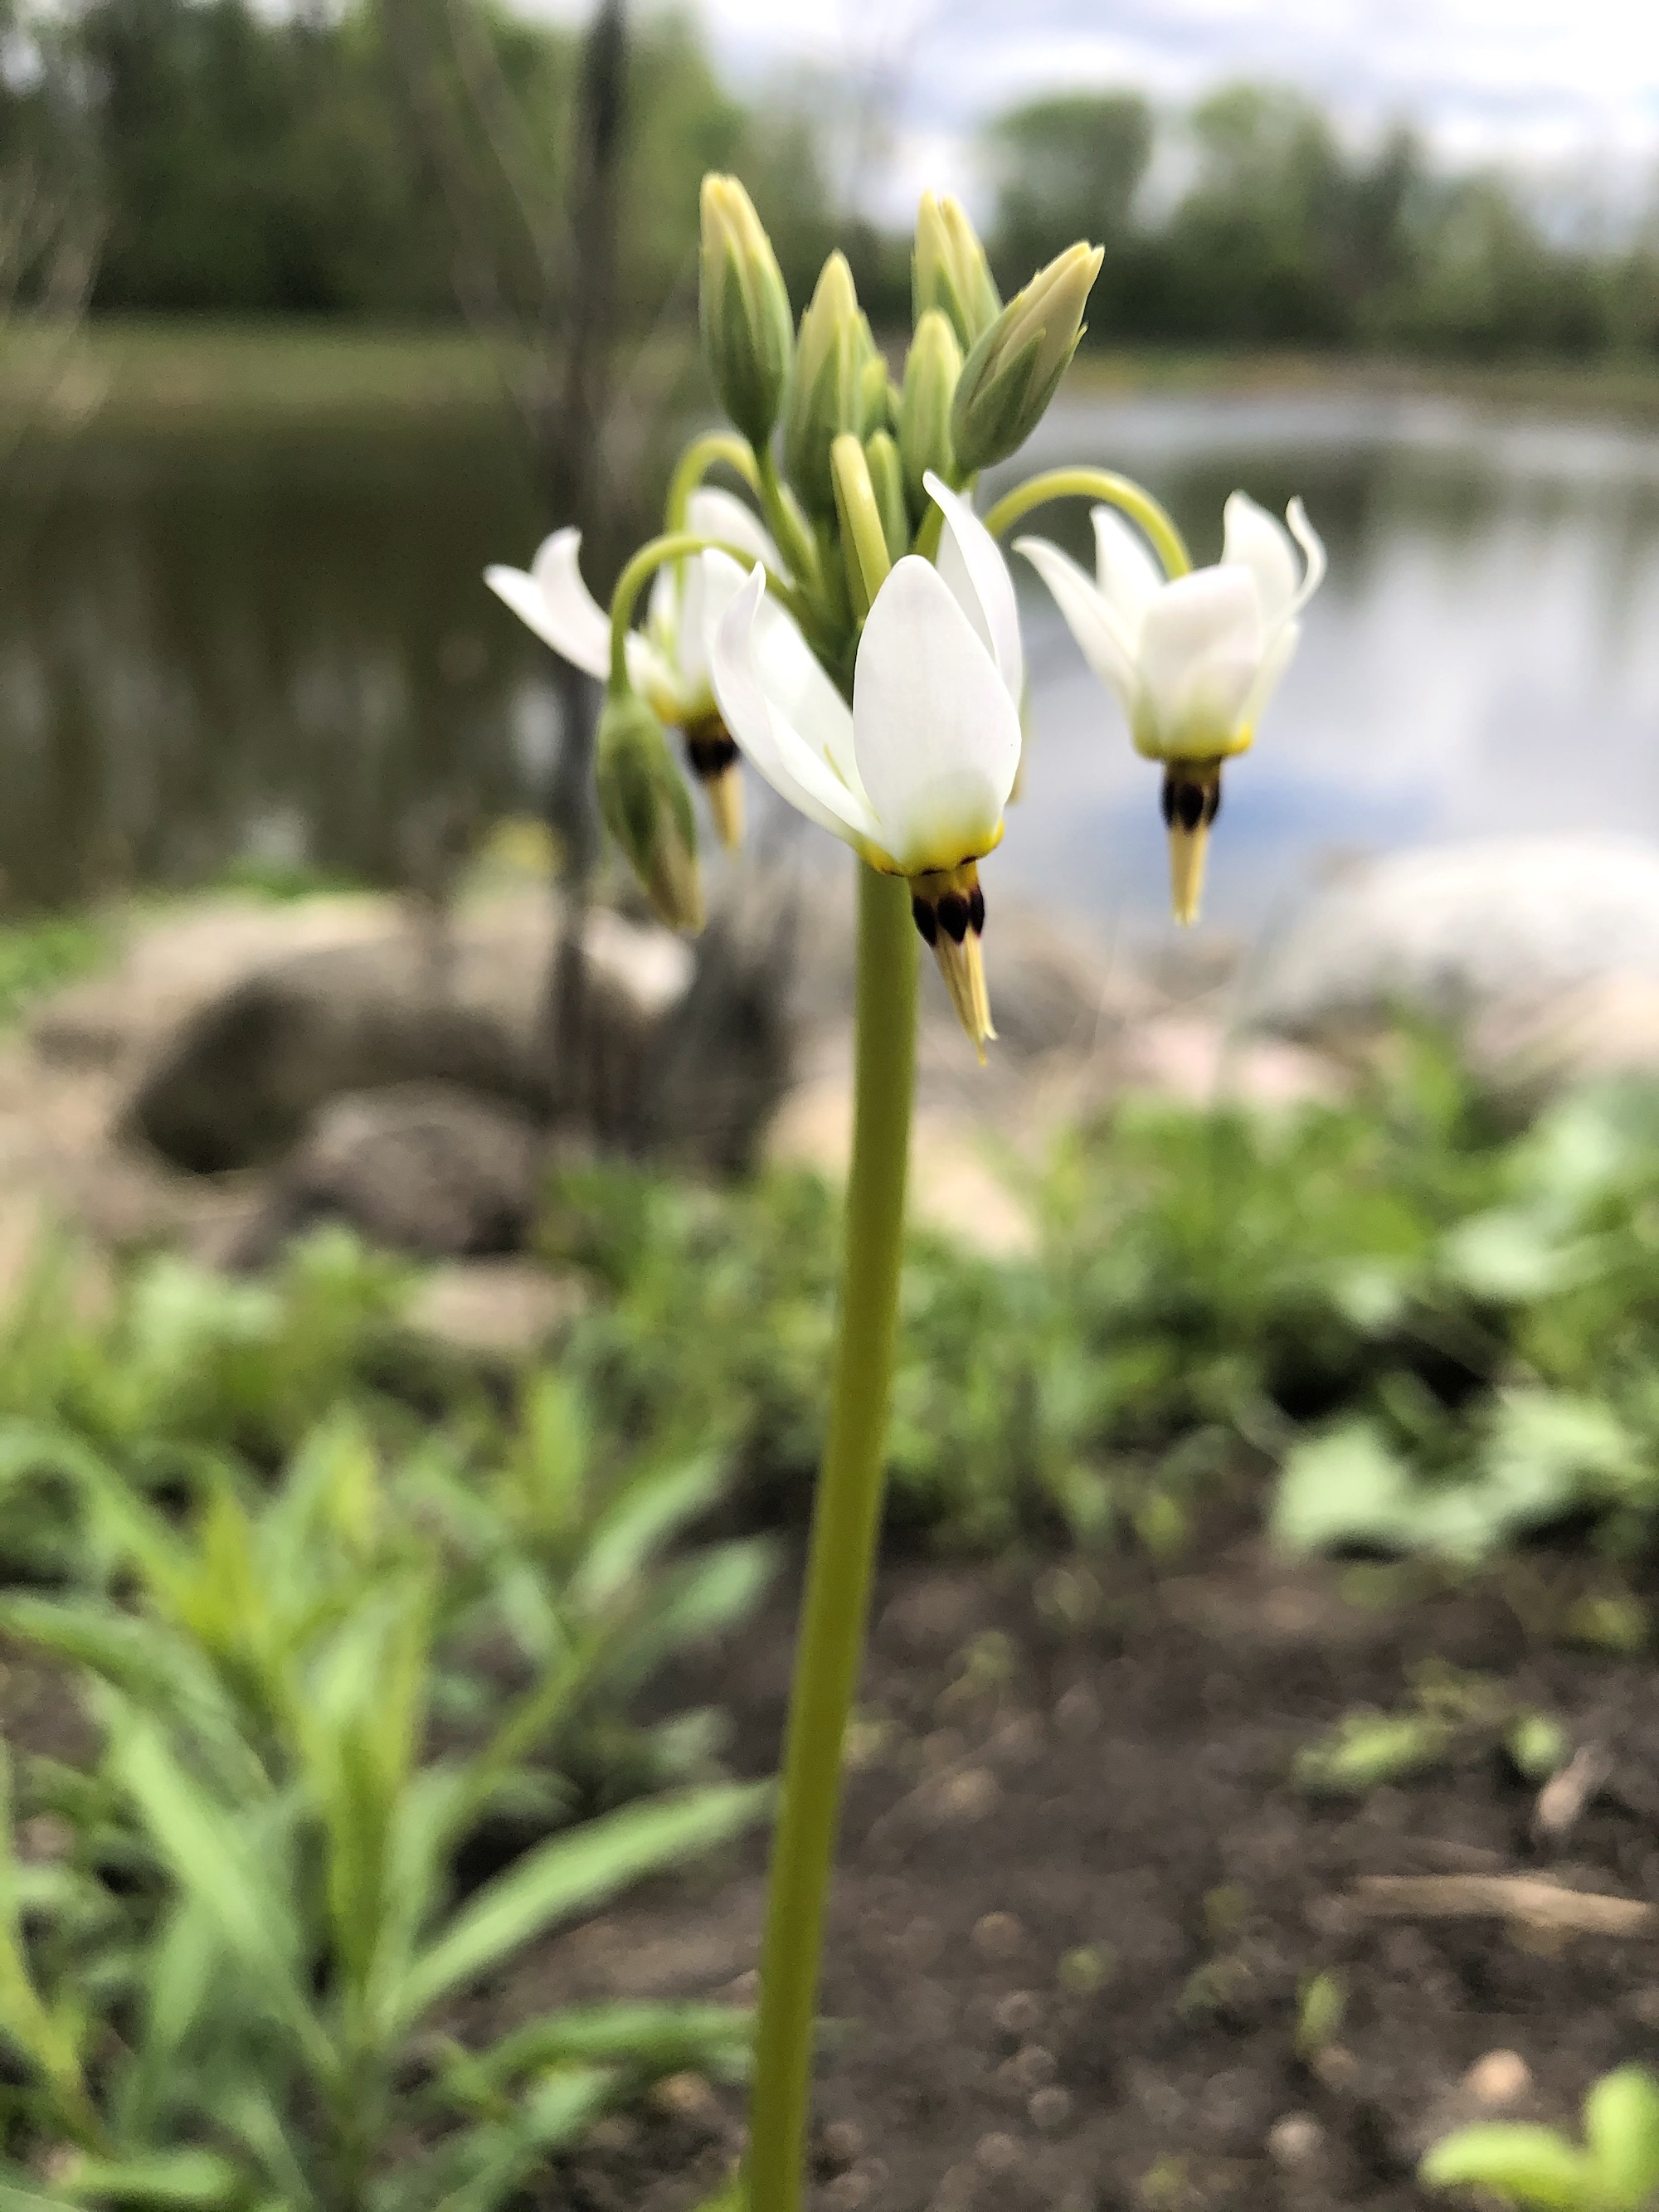 Shooting Star on bank of retaining pond on May 7, 2021.